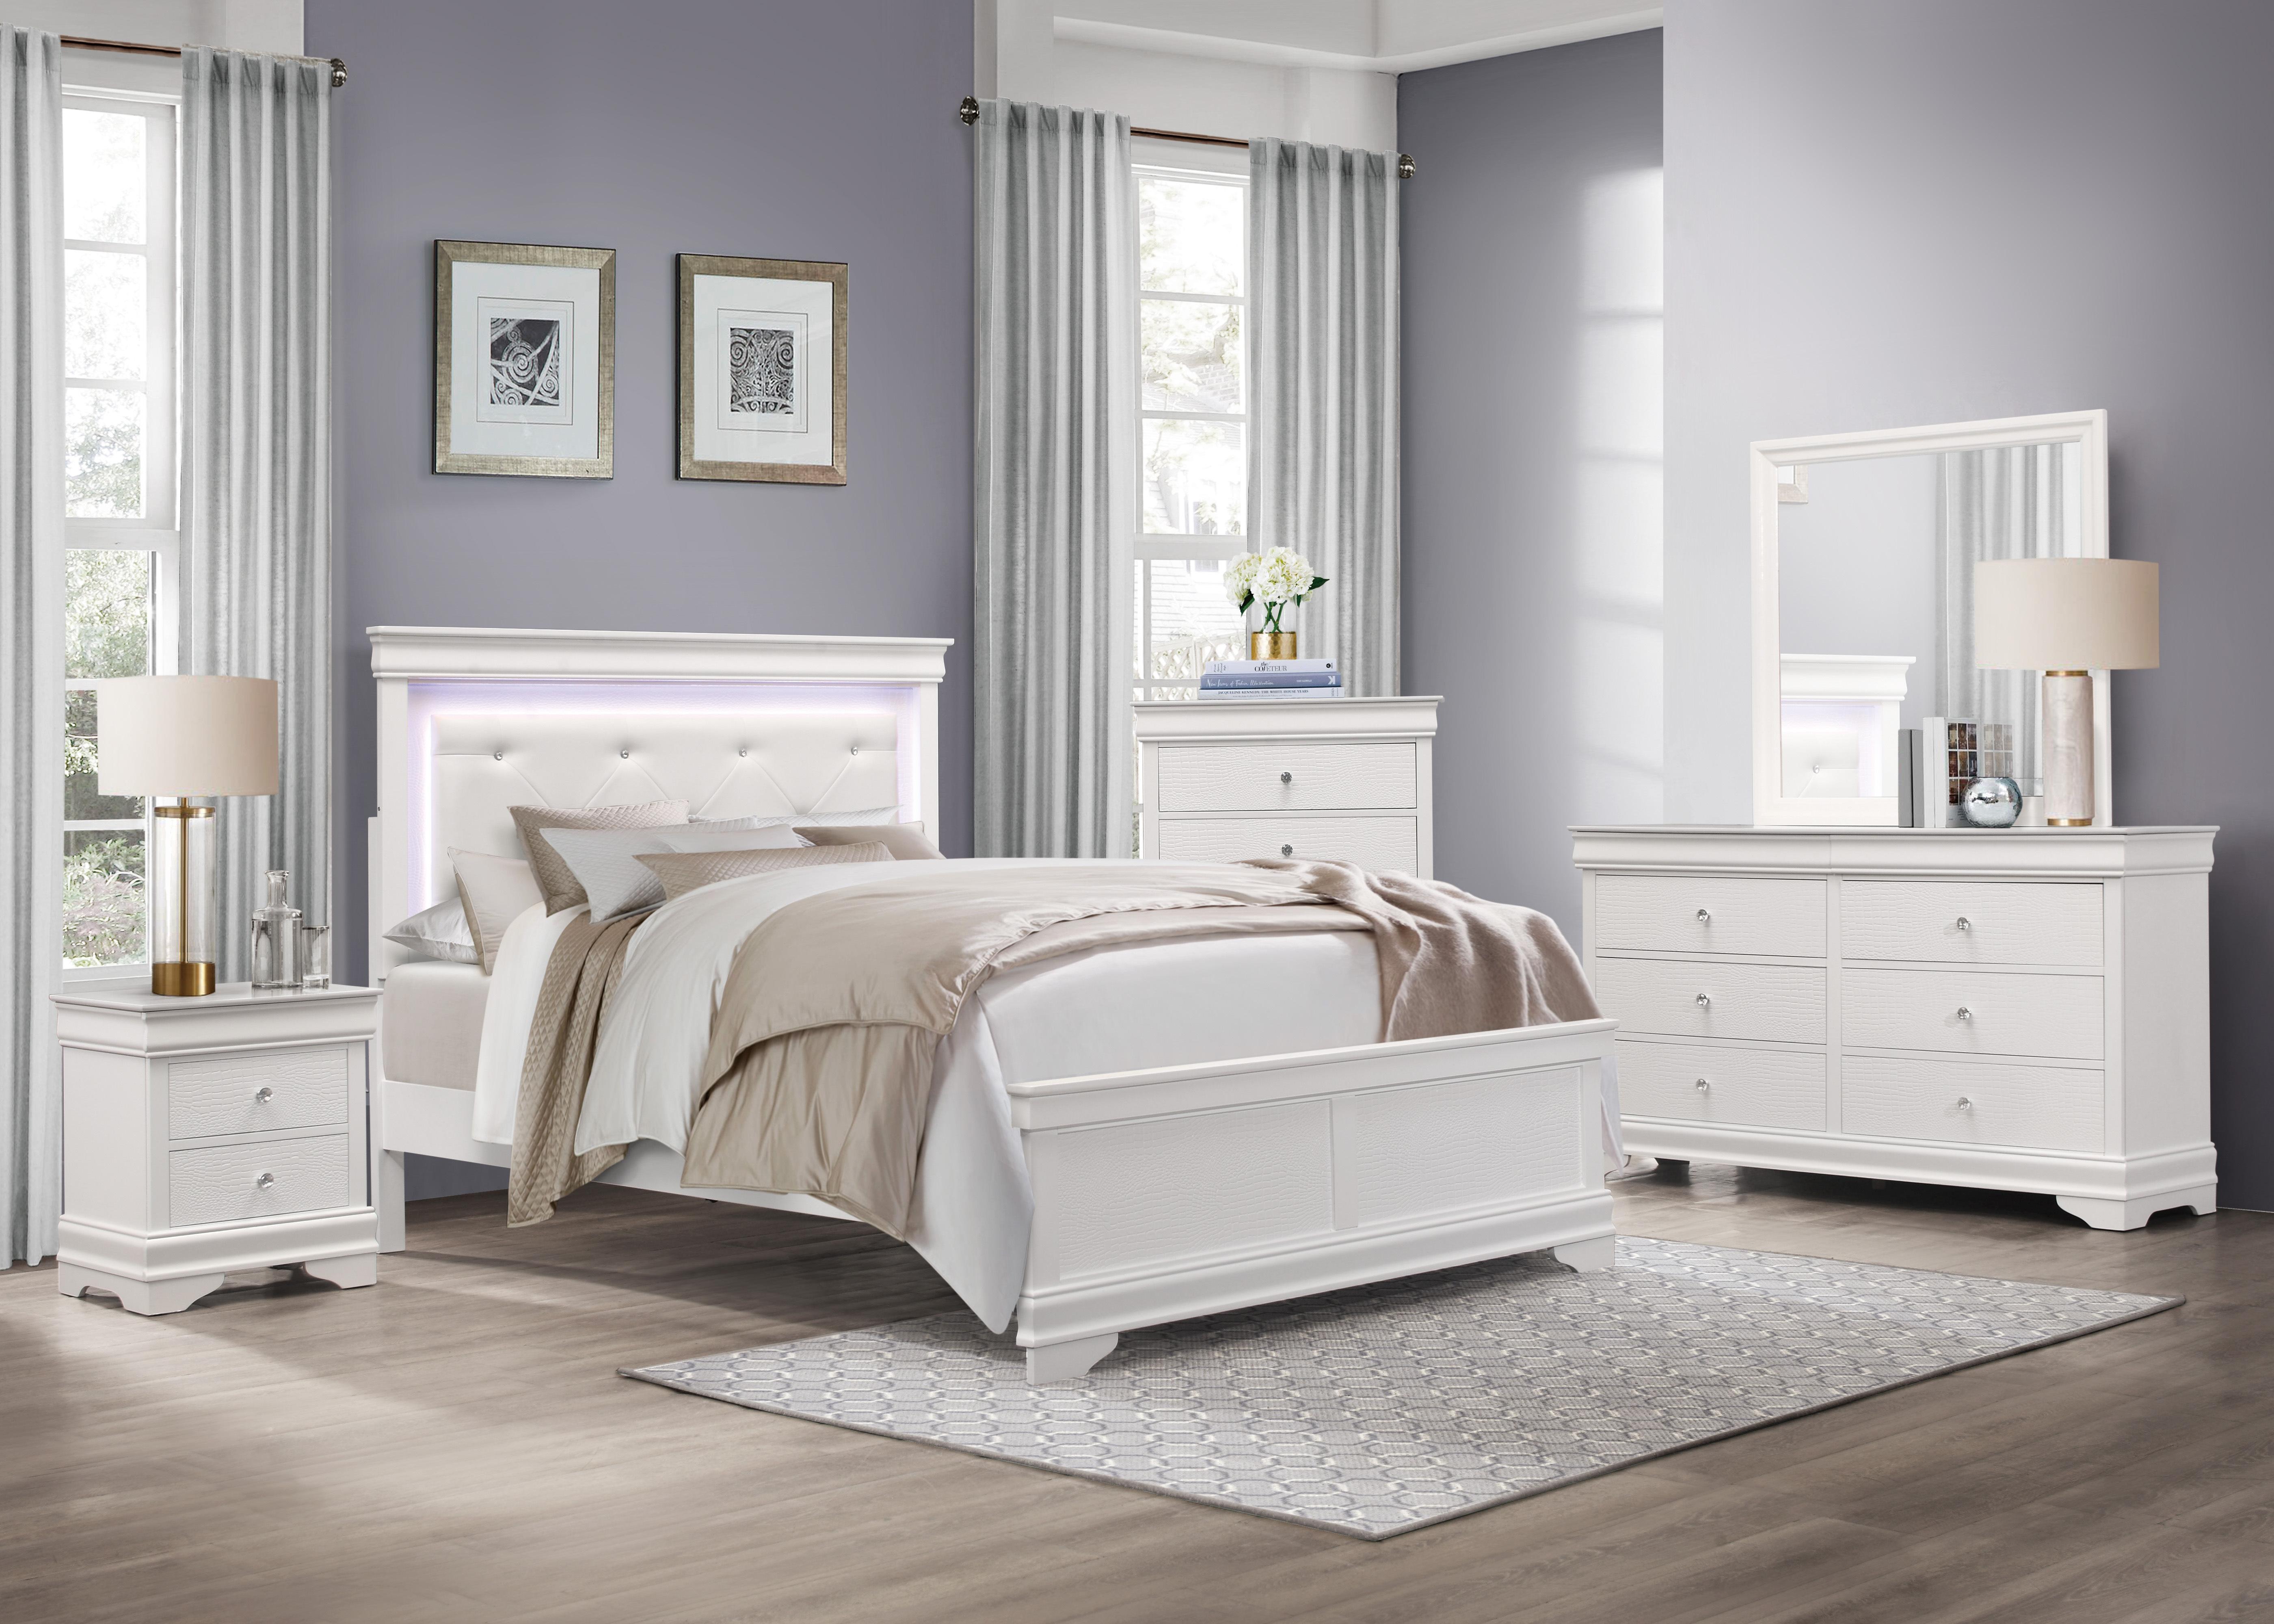 Traditional Bedroom Set 1556WK-1CK-6PC Lana 1556WK-1CK-6PC in White Faux Leather